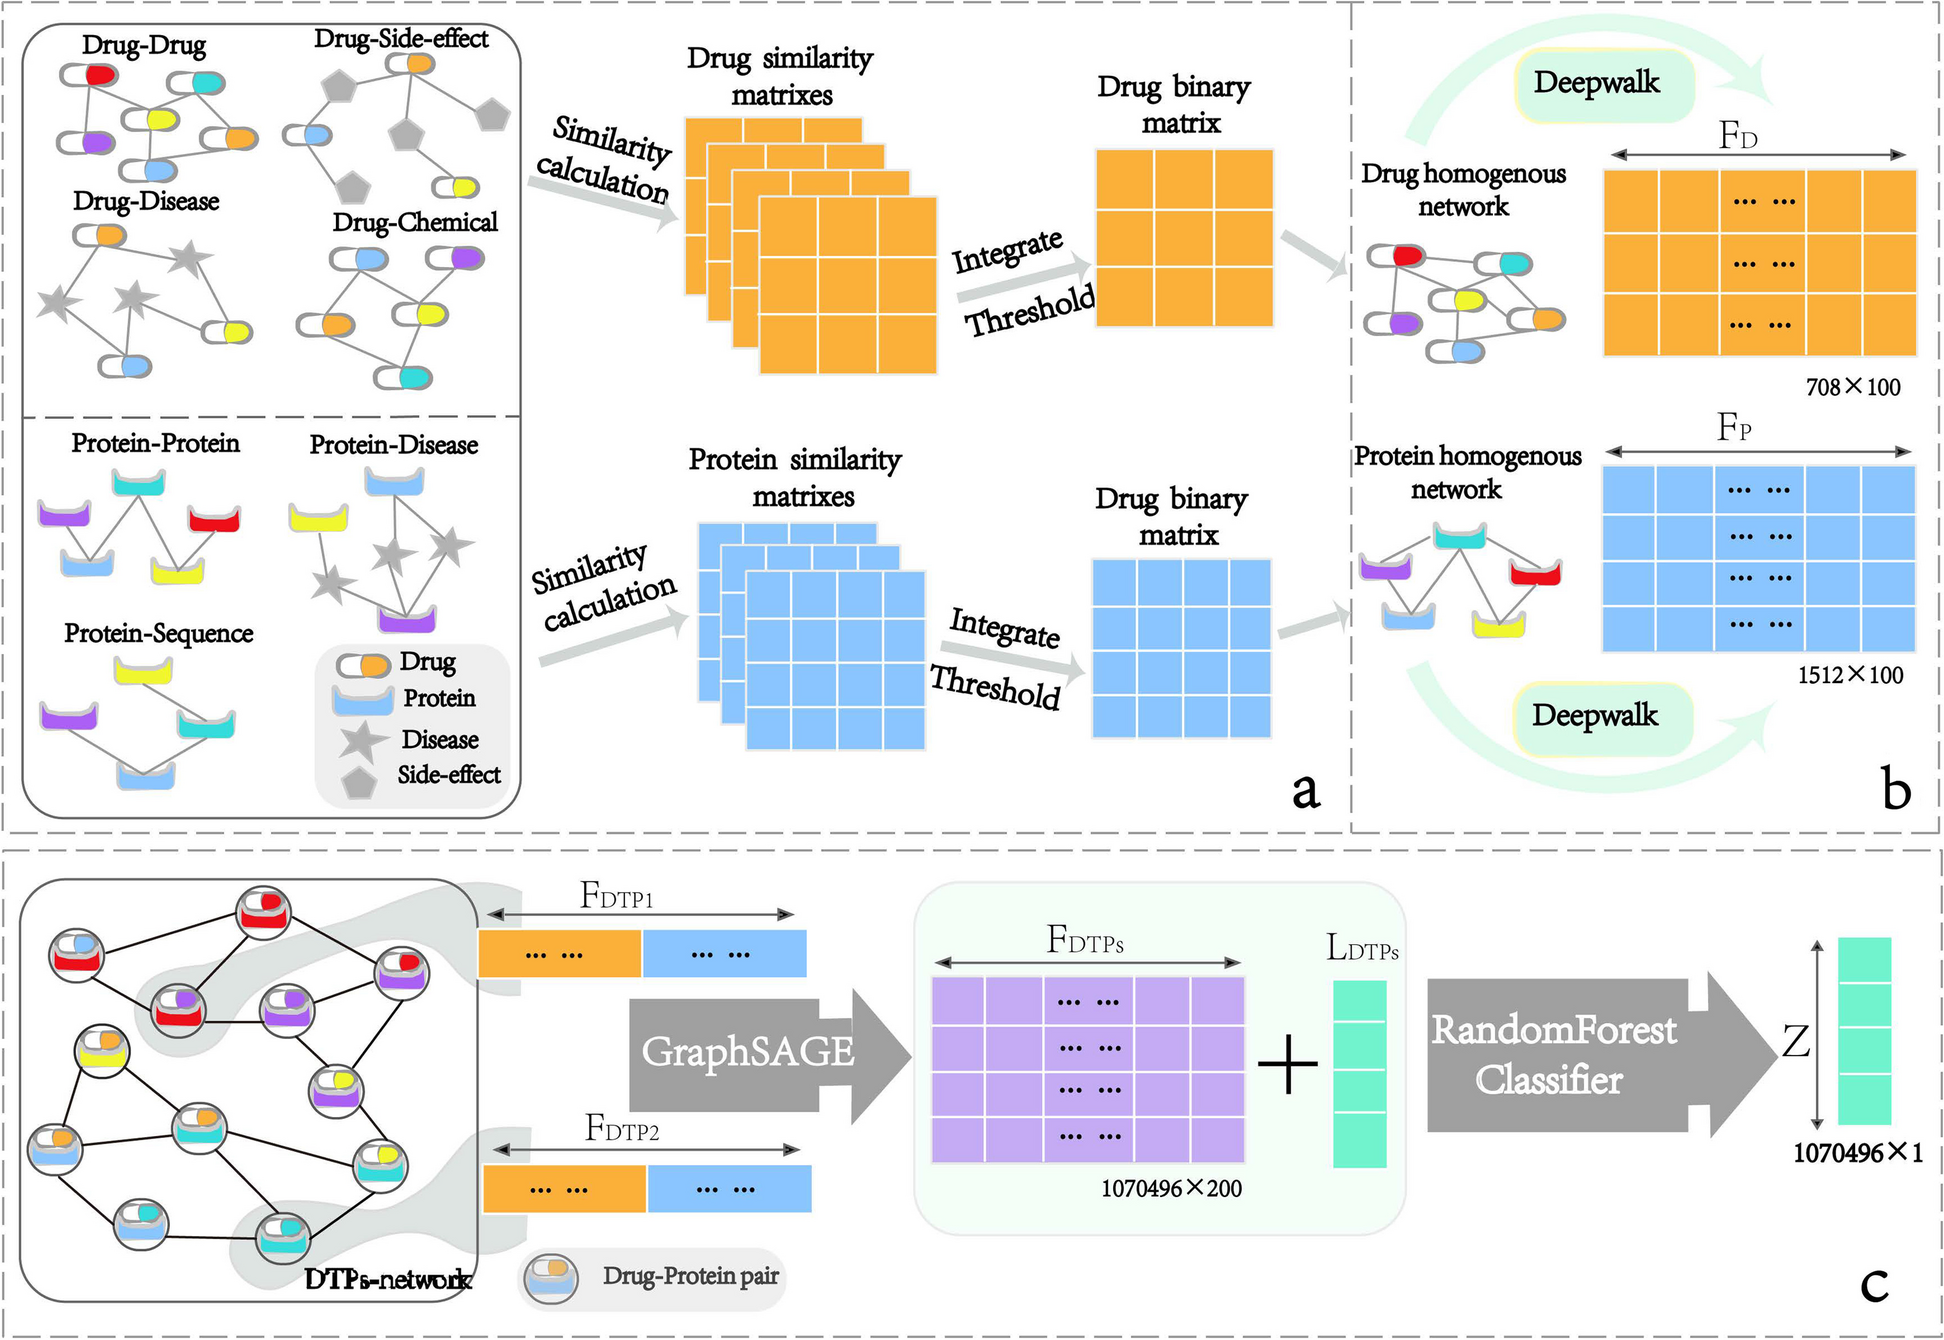 GSRF-DTI: a framework for drug-target interaction prediction based on a drug-target pair network and representation learning on a large graph